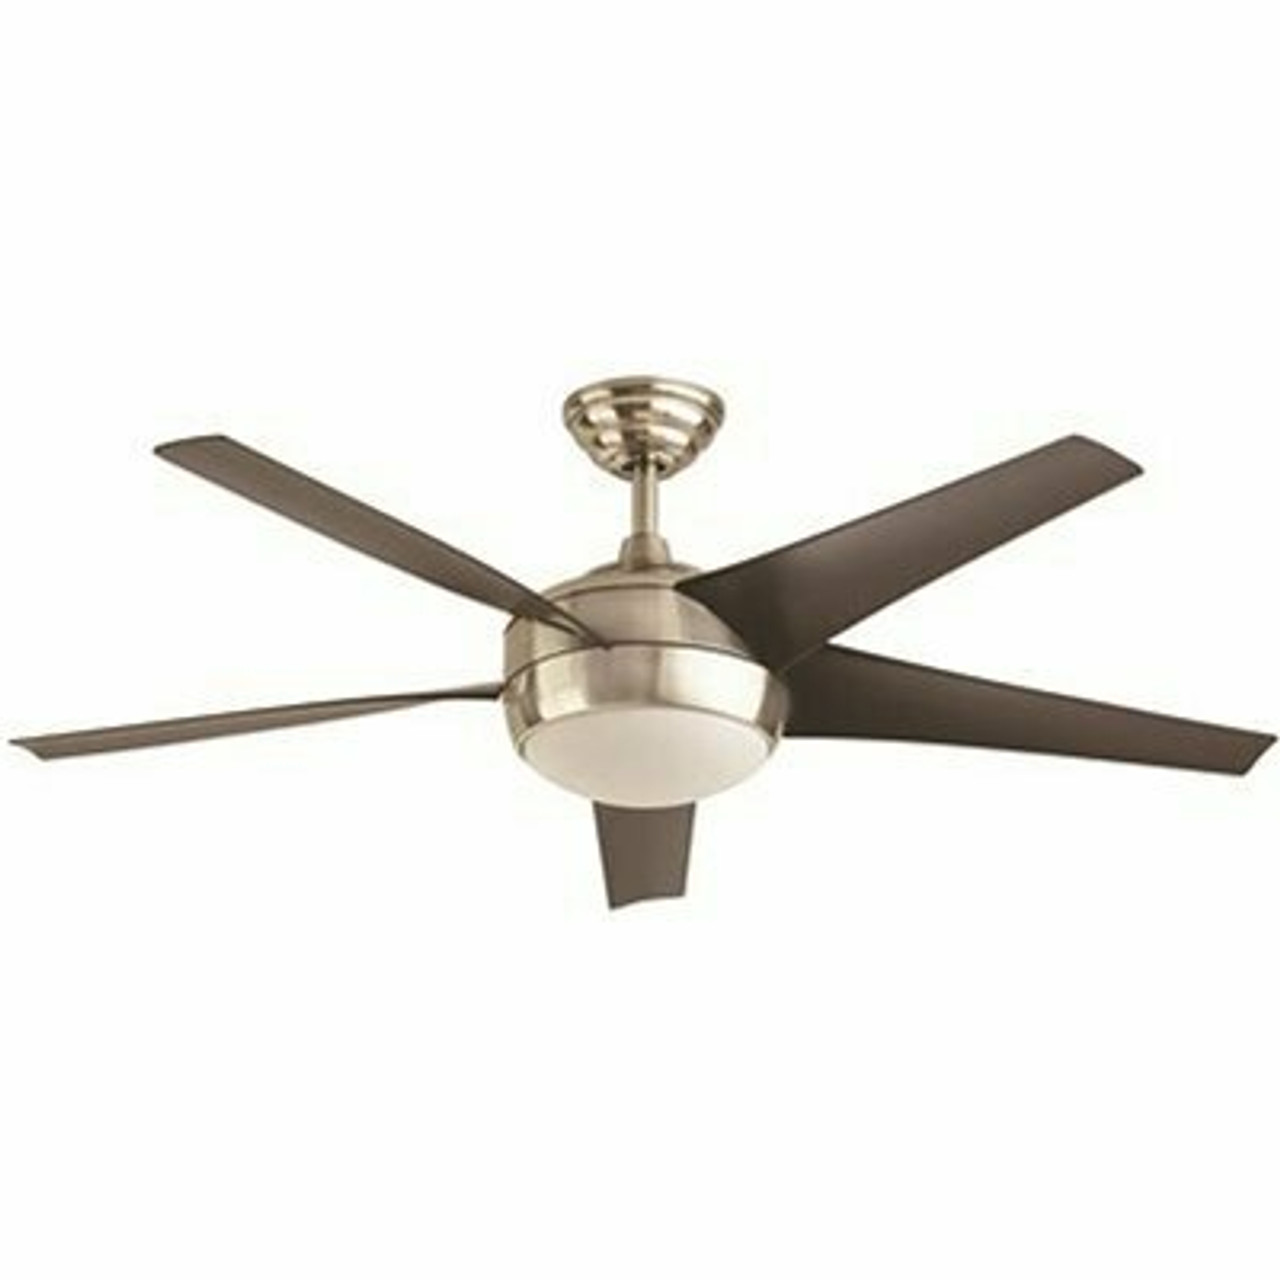 KIT ORDERS ONLY - NOT FOR INDIVIDUAL SALE - Home Decorators Collection Windward 52 in. LED Brushed Nickel Ceiling Fan with Light Kit